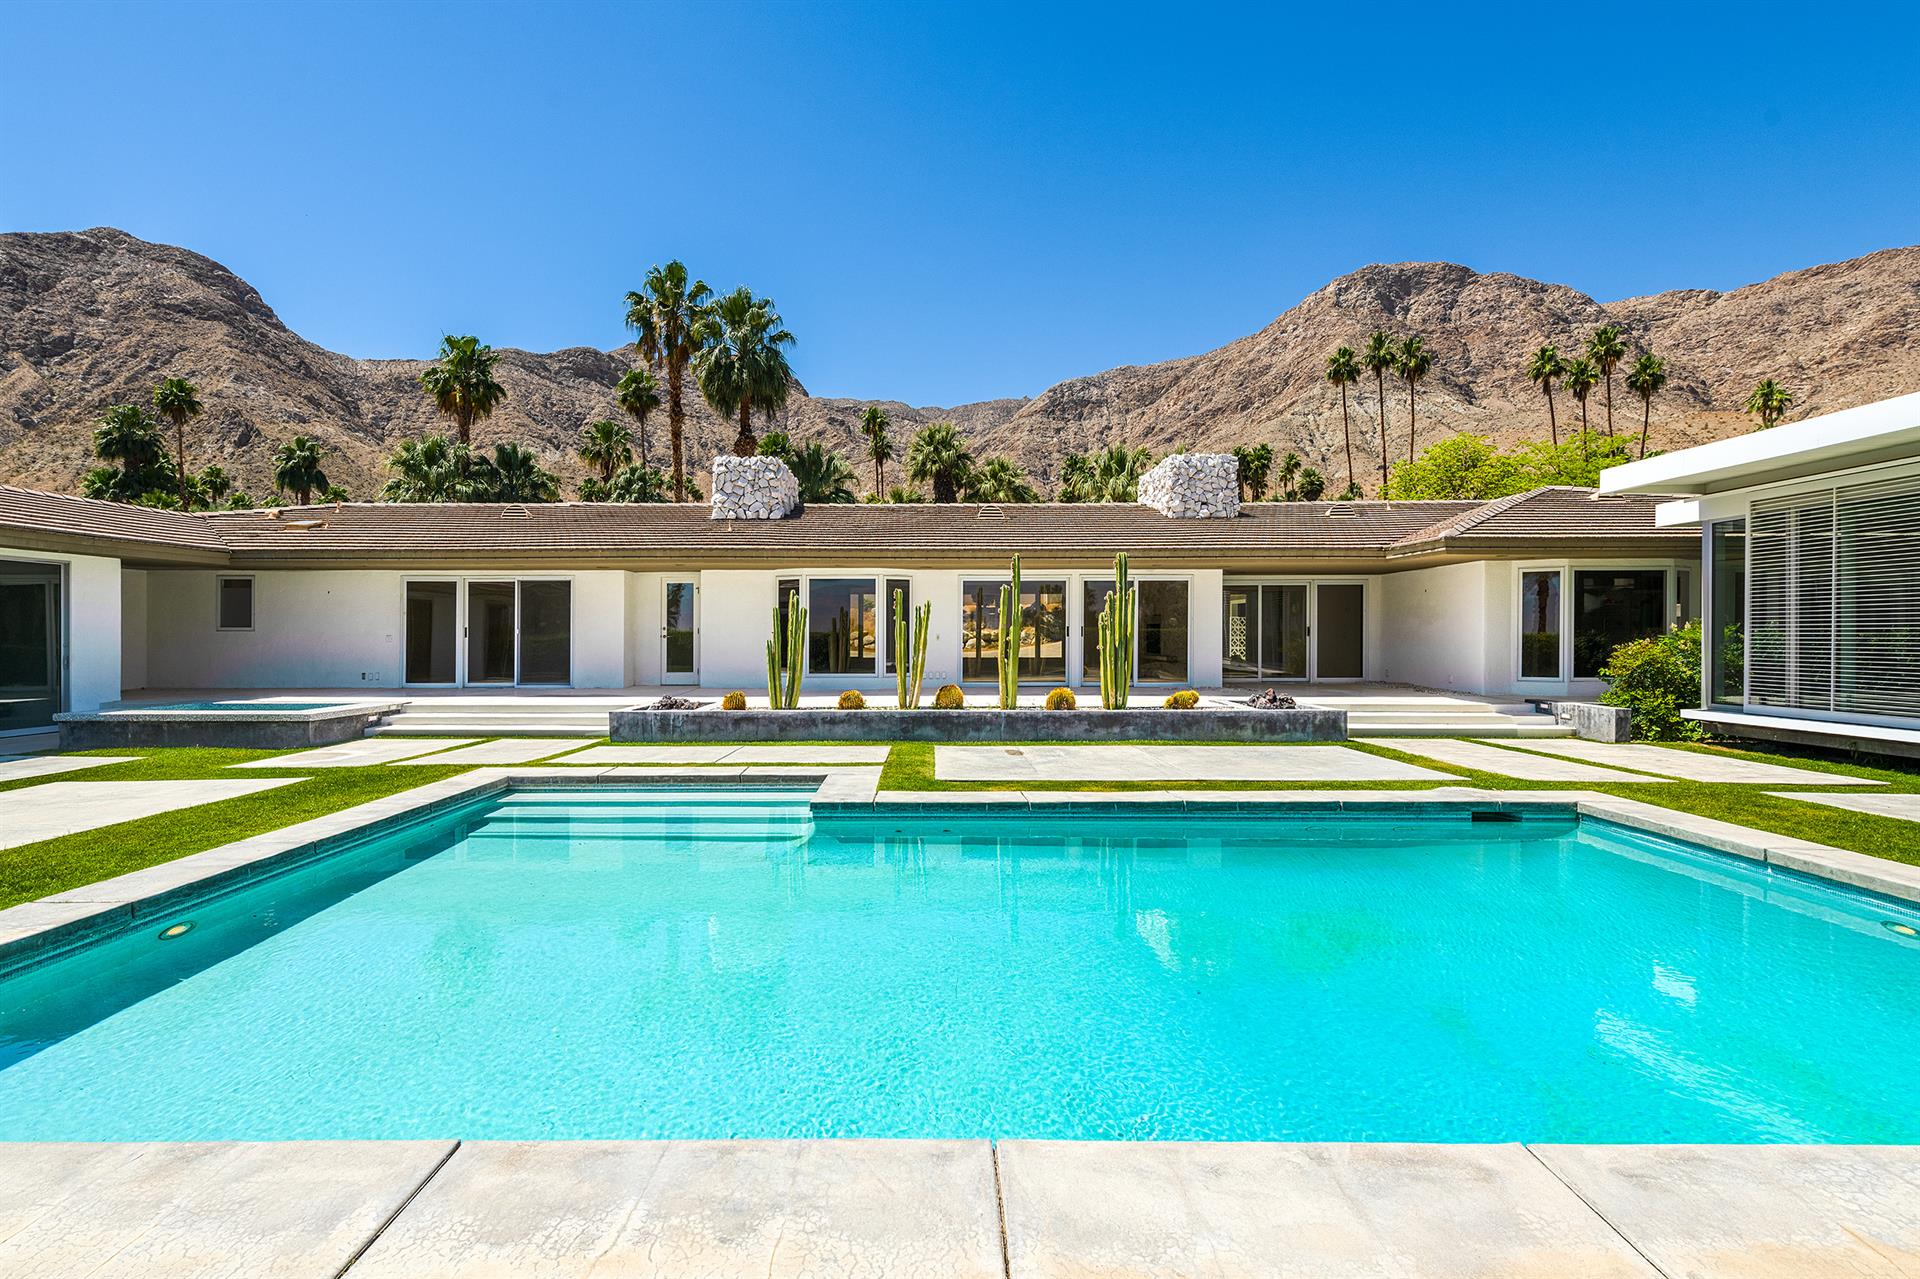 70260 Carson Rd: a luxury home for sale in Rancho Mirage, Riverside County, Palm Springs And ...